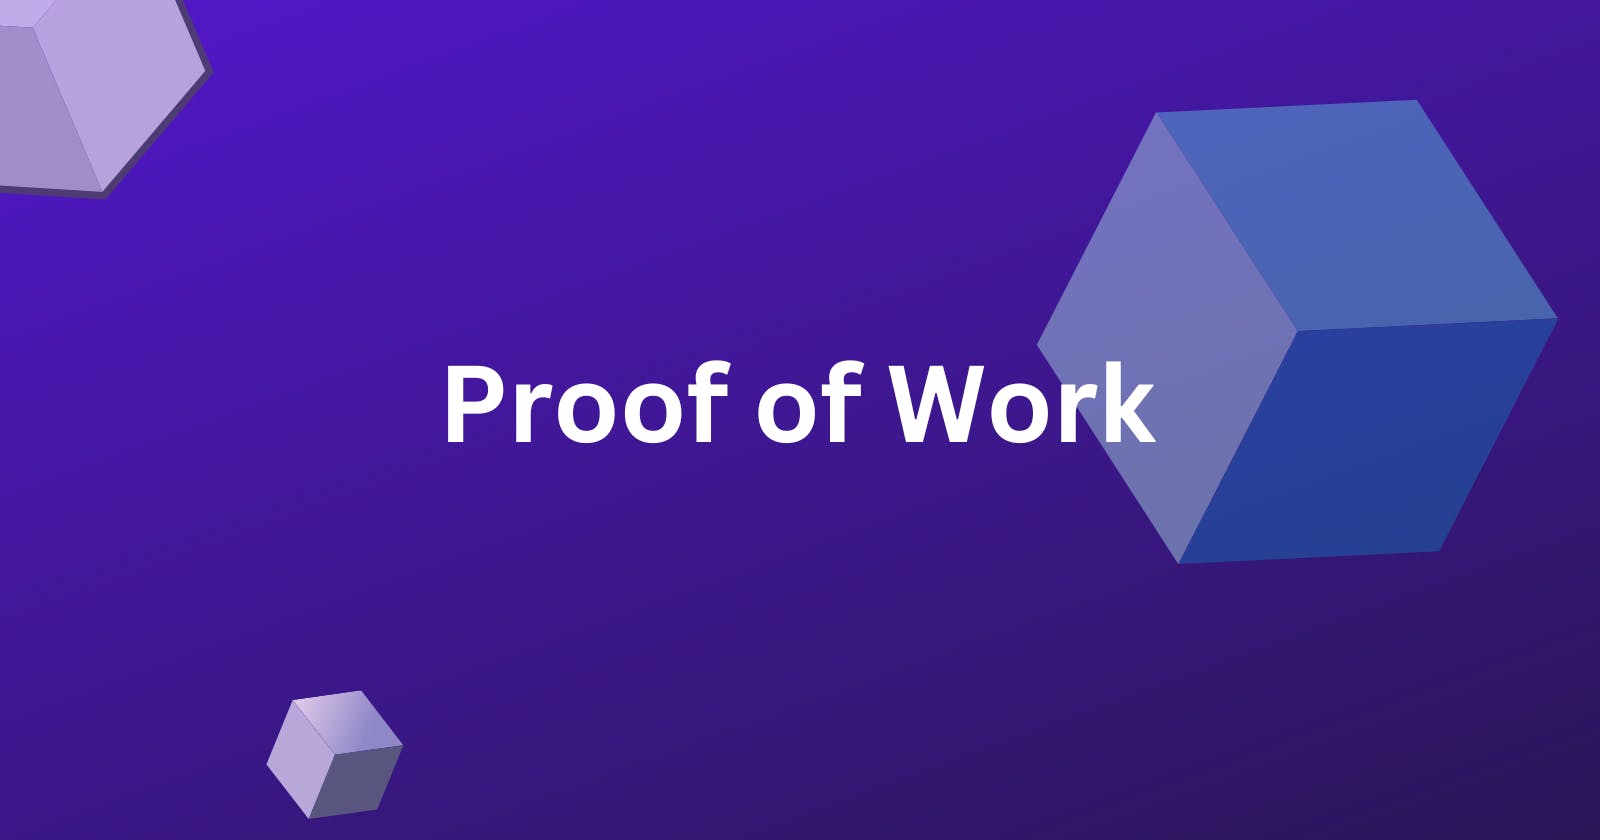 Proof of Work for Bitcoin